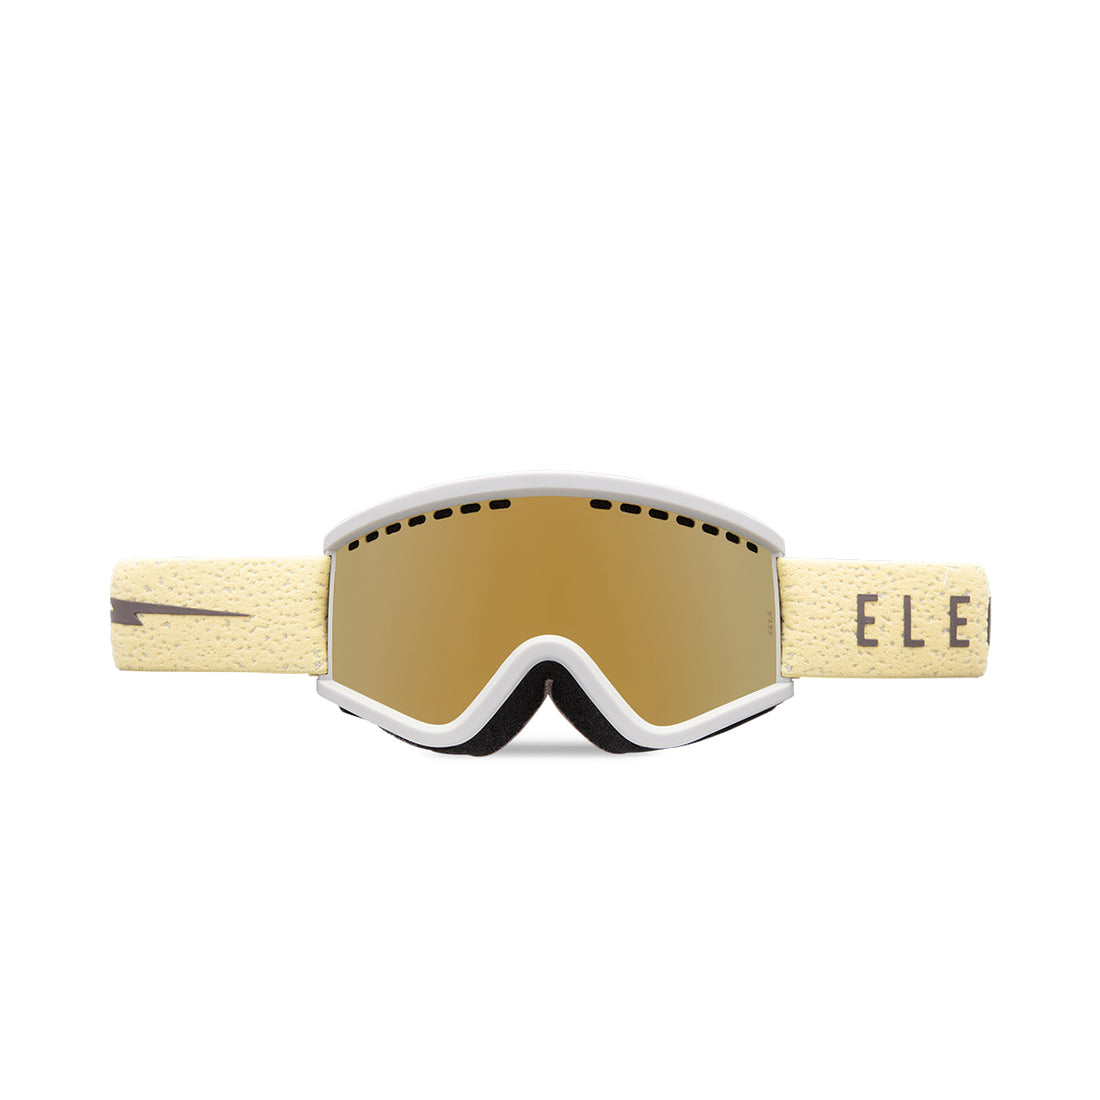 ELECTRIC EGV.K YOUTH SNOWBOARD GOGGLES - CANNA SPECKLE